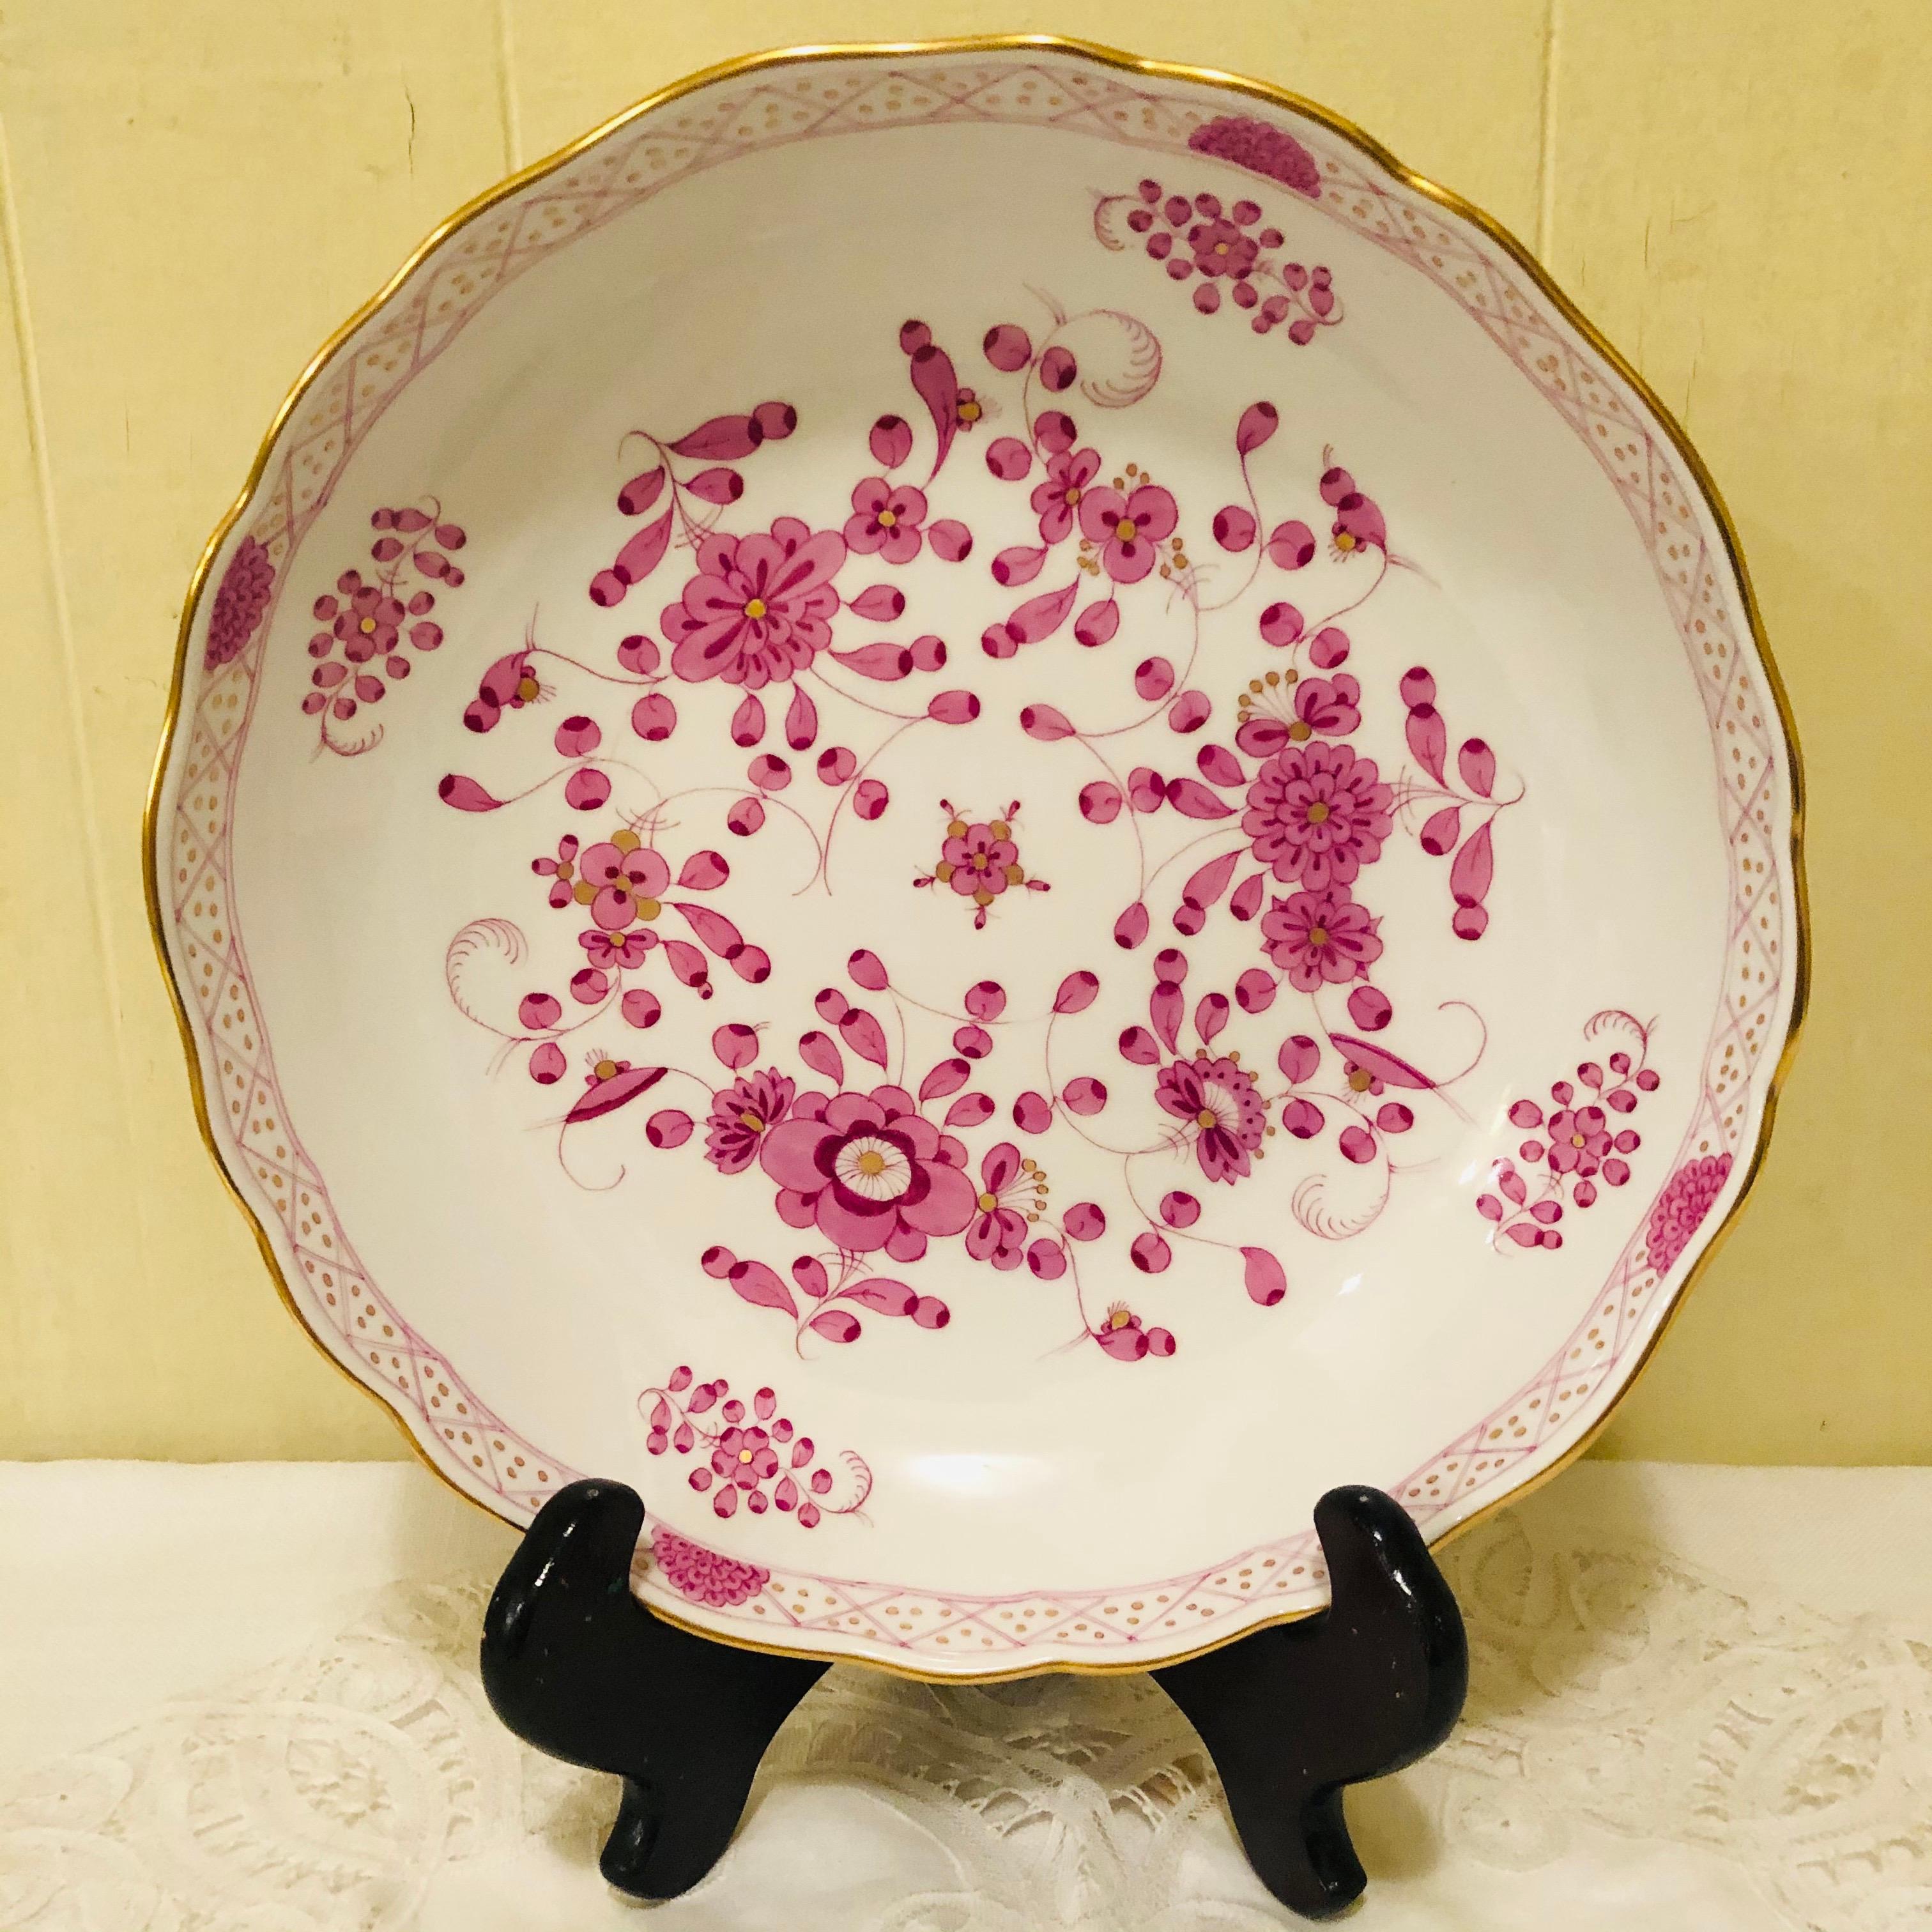 We are offering you this lovely Meissen purple Indian serving bowl.  It has detailed paintings of pink flowers with some purple and gold accents on a white ground. The detail of the painting on this serving bowl is beautifully done. It has a gold